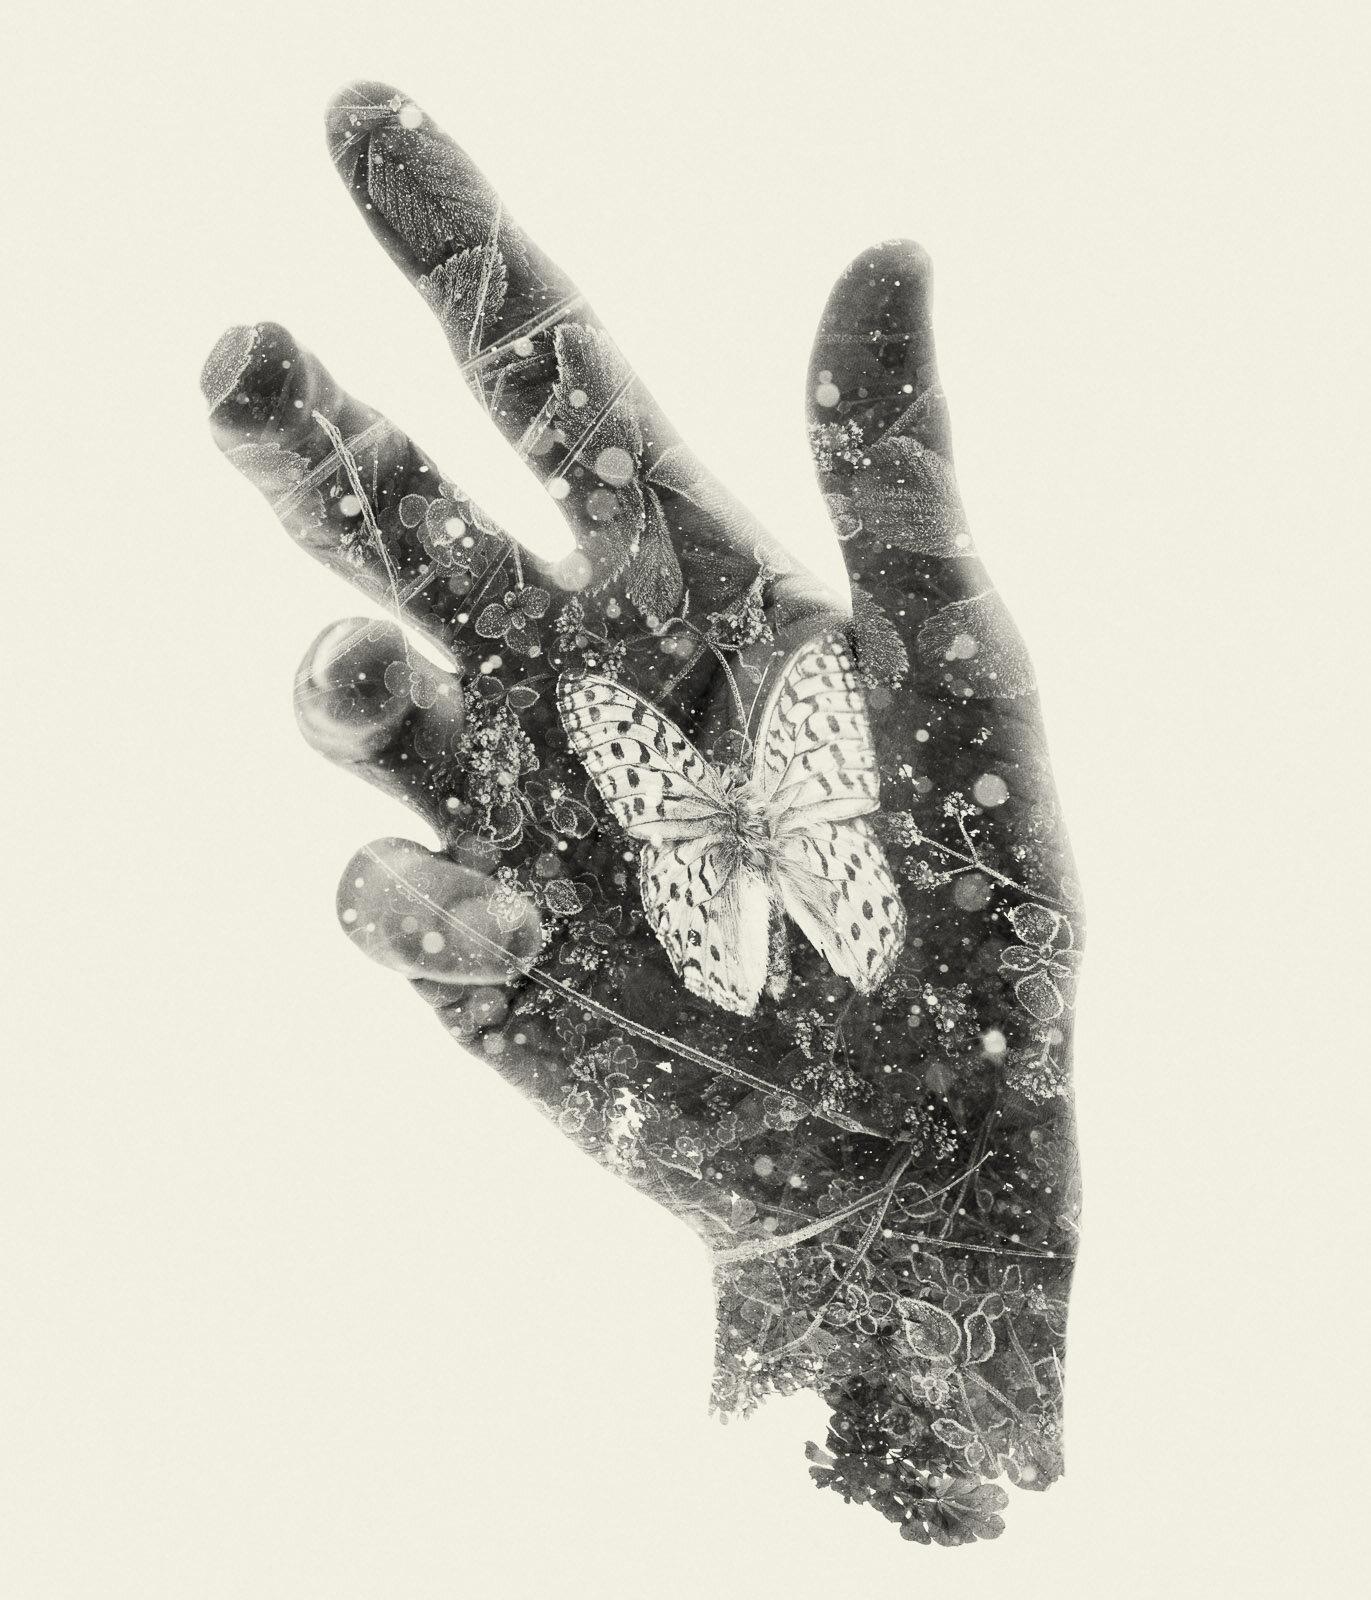 Christoffer Relander Landscape Photograph - Resting Butterfly - black and white hand and nature multi exposure photograph